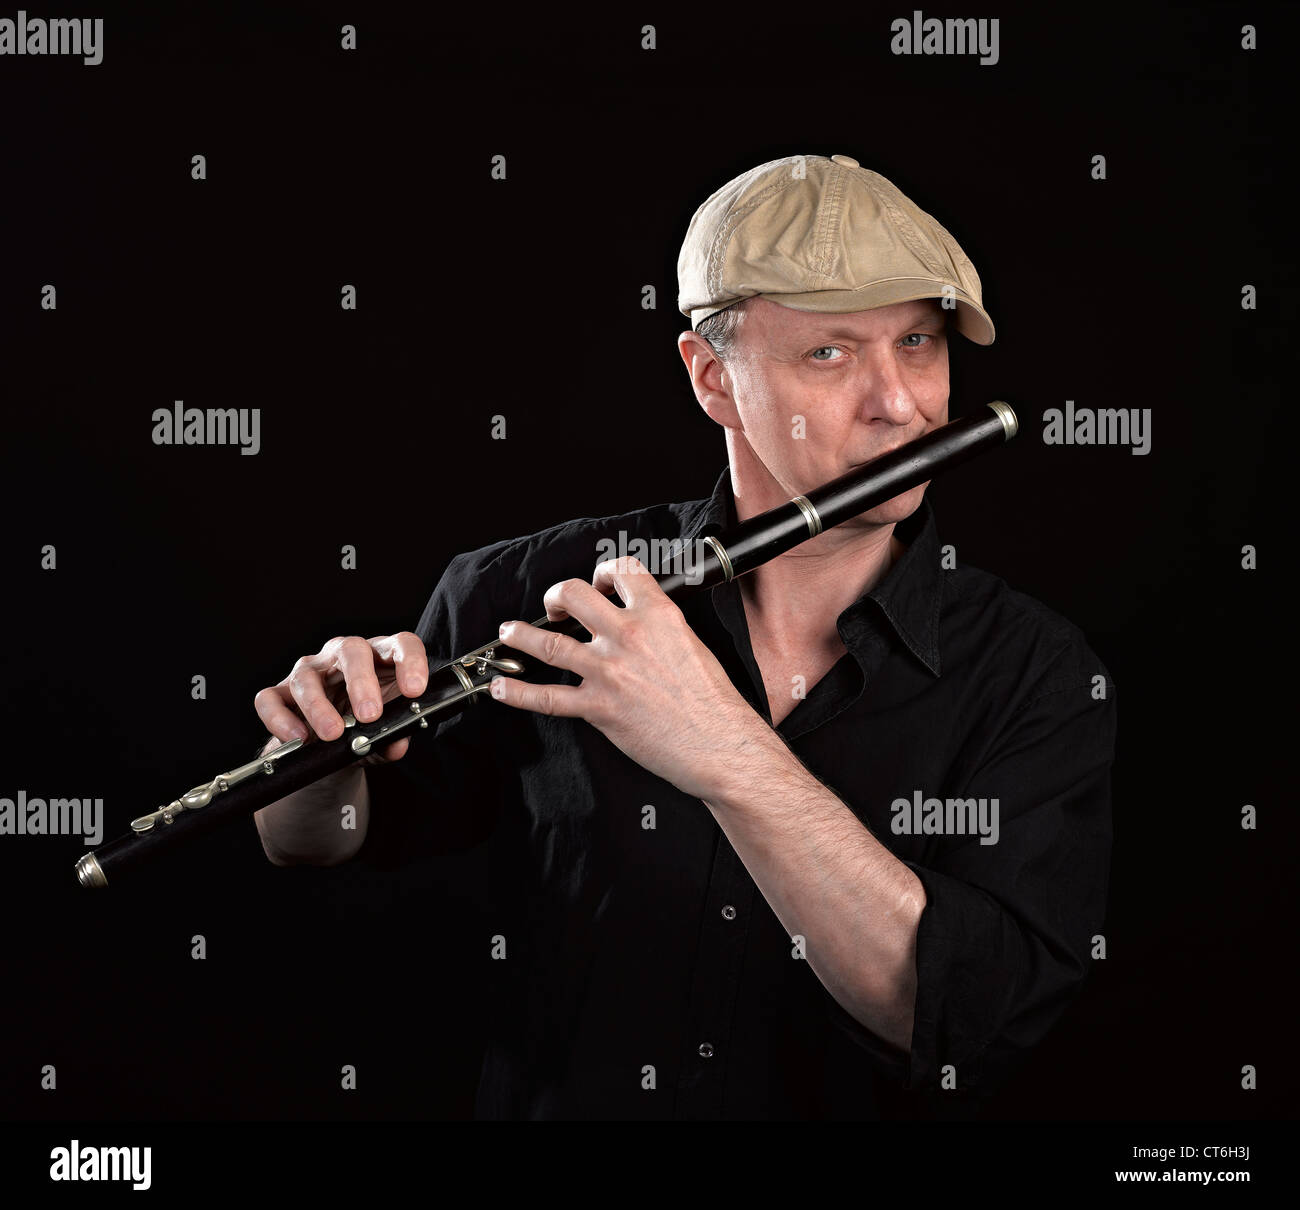 Portrait of a man playing ols wooden transverse flute, isolated on black Stock Photo